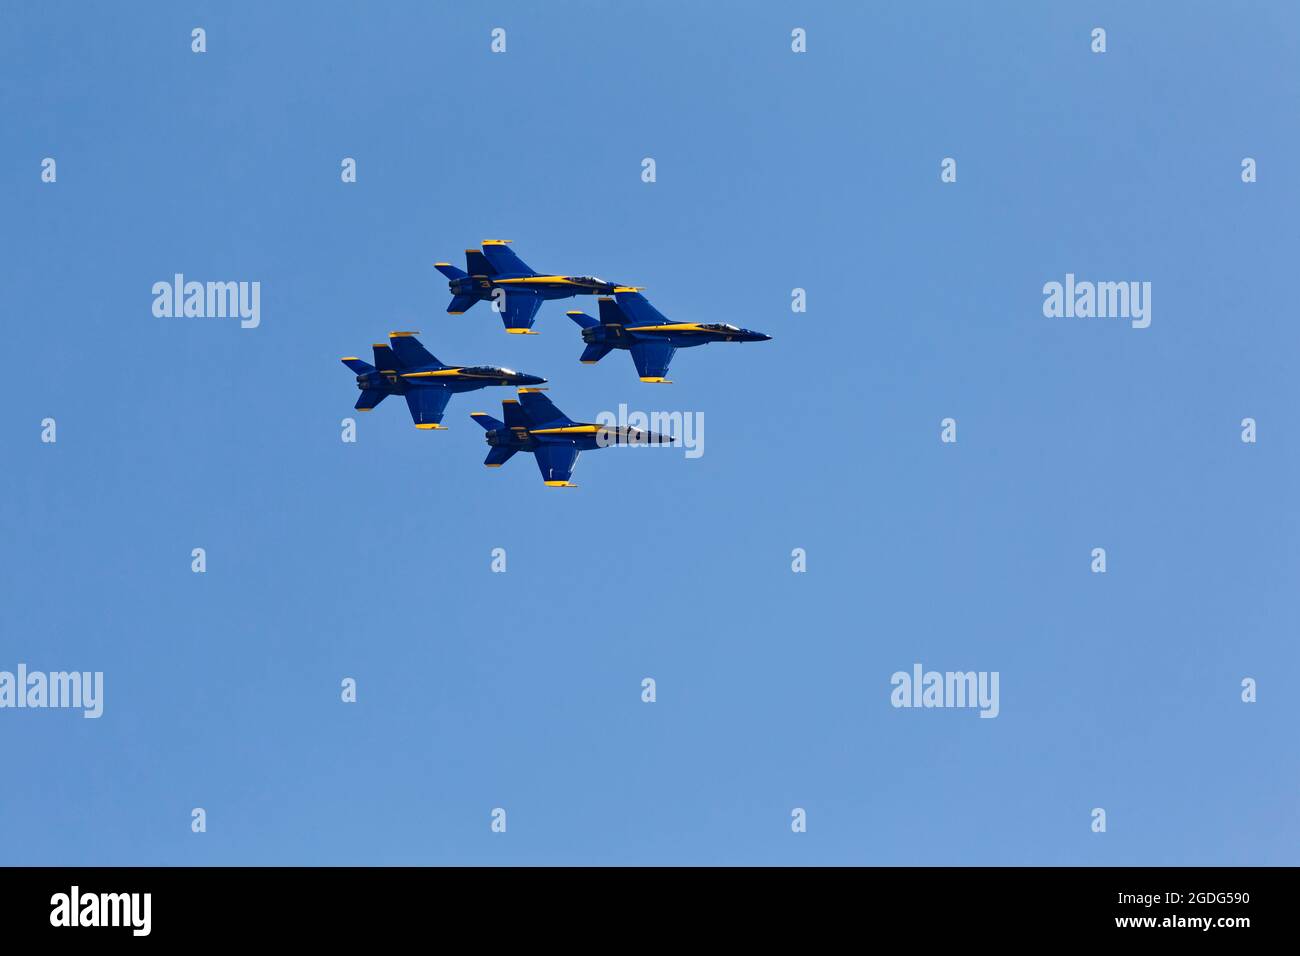 The United States Navy's Blue Angels flight demonstration squadron practices for the Owensboro Air Show on Thursday, August 12, 2021 in Owensboro, Daviess County, KY, USA. More than 30,000 people typically attend the annual three-day event, which had to be canceled in 2020 due to the COVID-19 pandemic. (Apex MediaWire Photo by Billy Suratt) Stock Photo